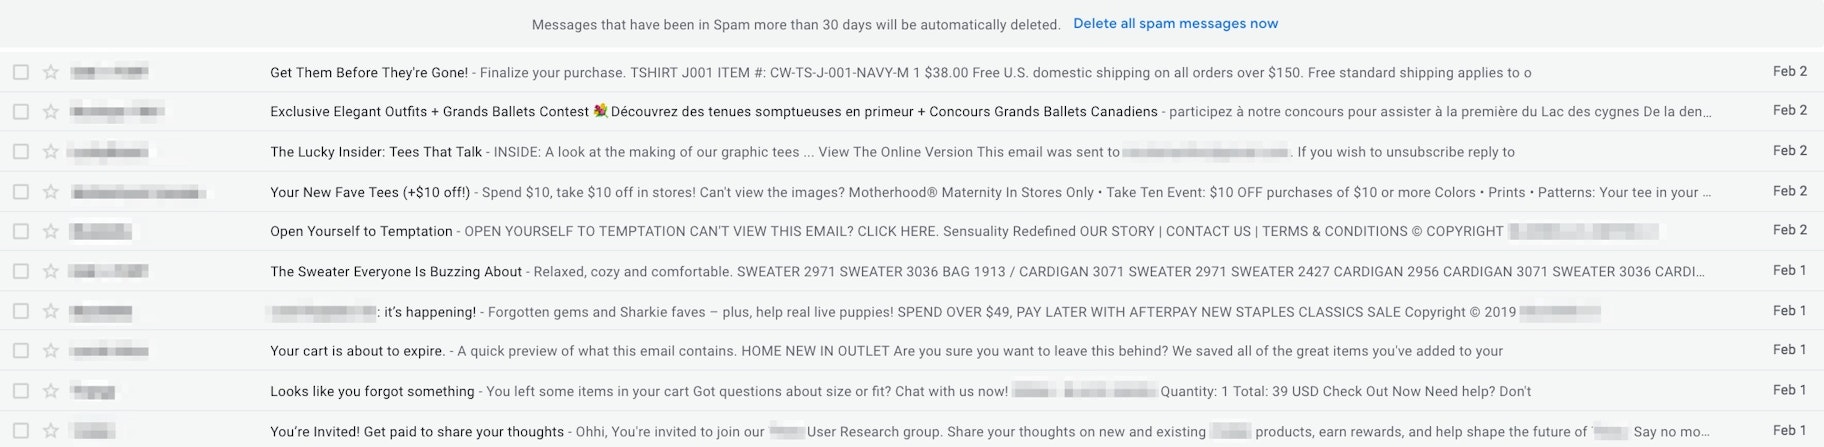 Spam emails